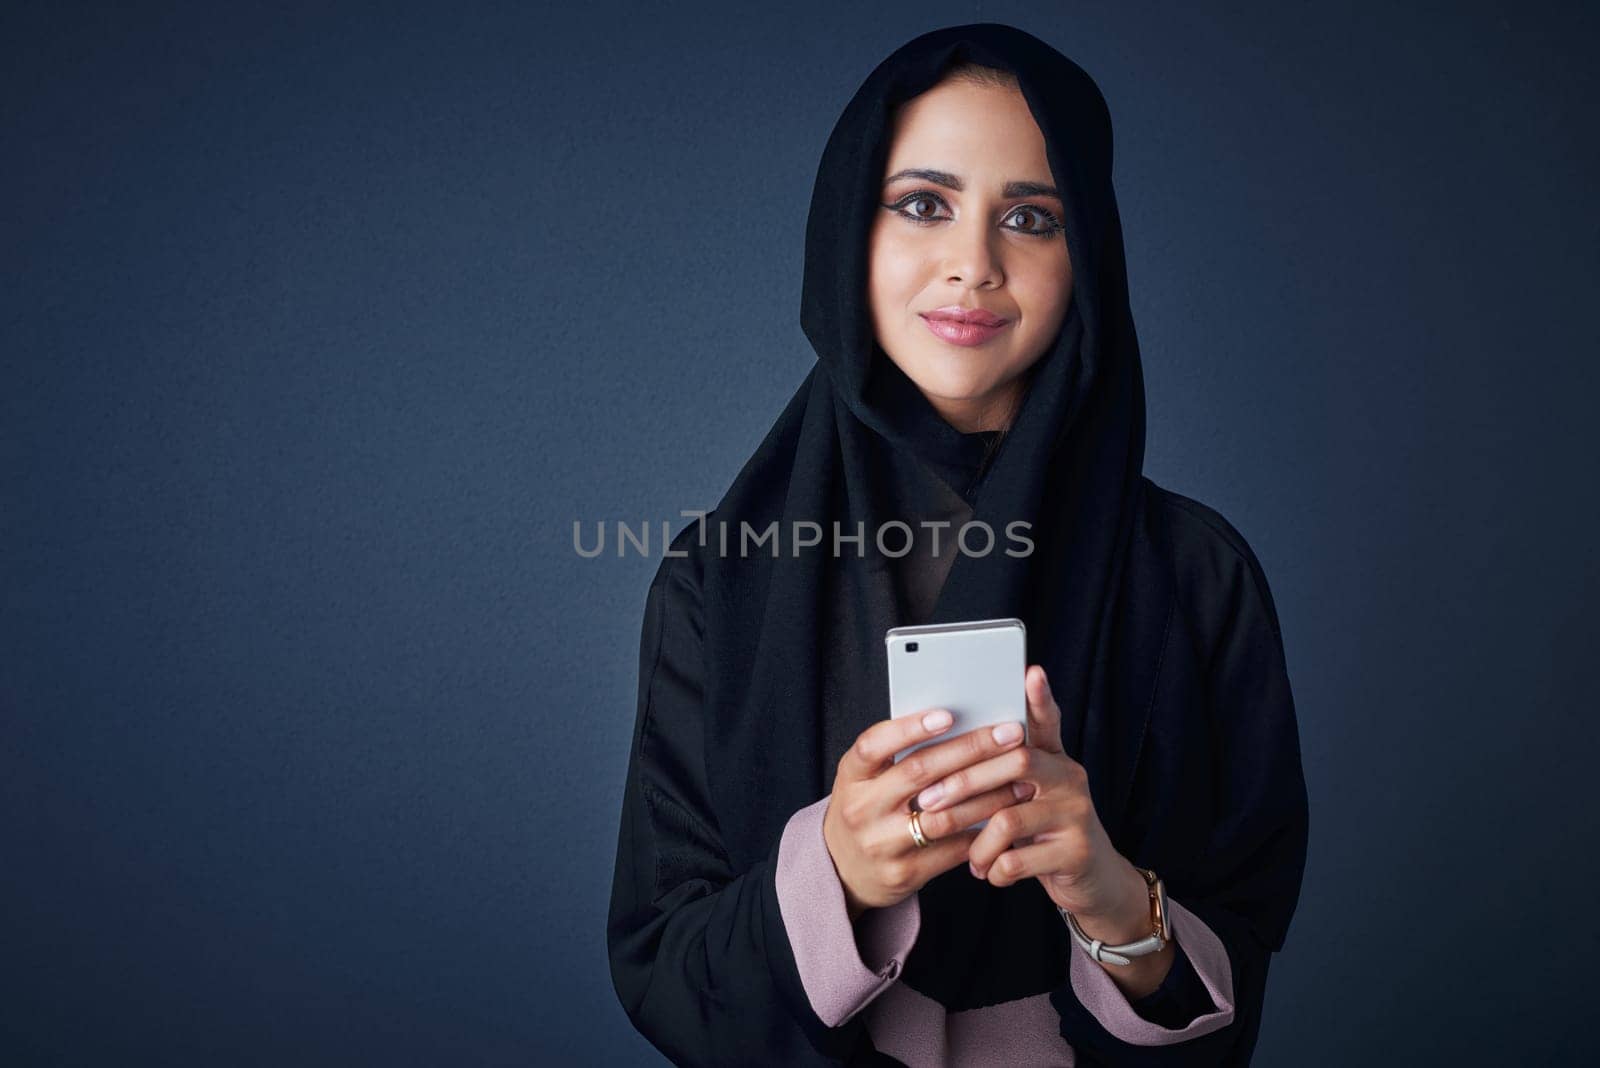 Im connected, lets chat. Studio portrait of a young woman wearing a burqa and using a mobile phone against a gray background